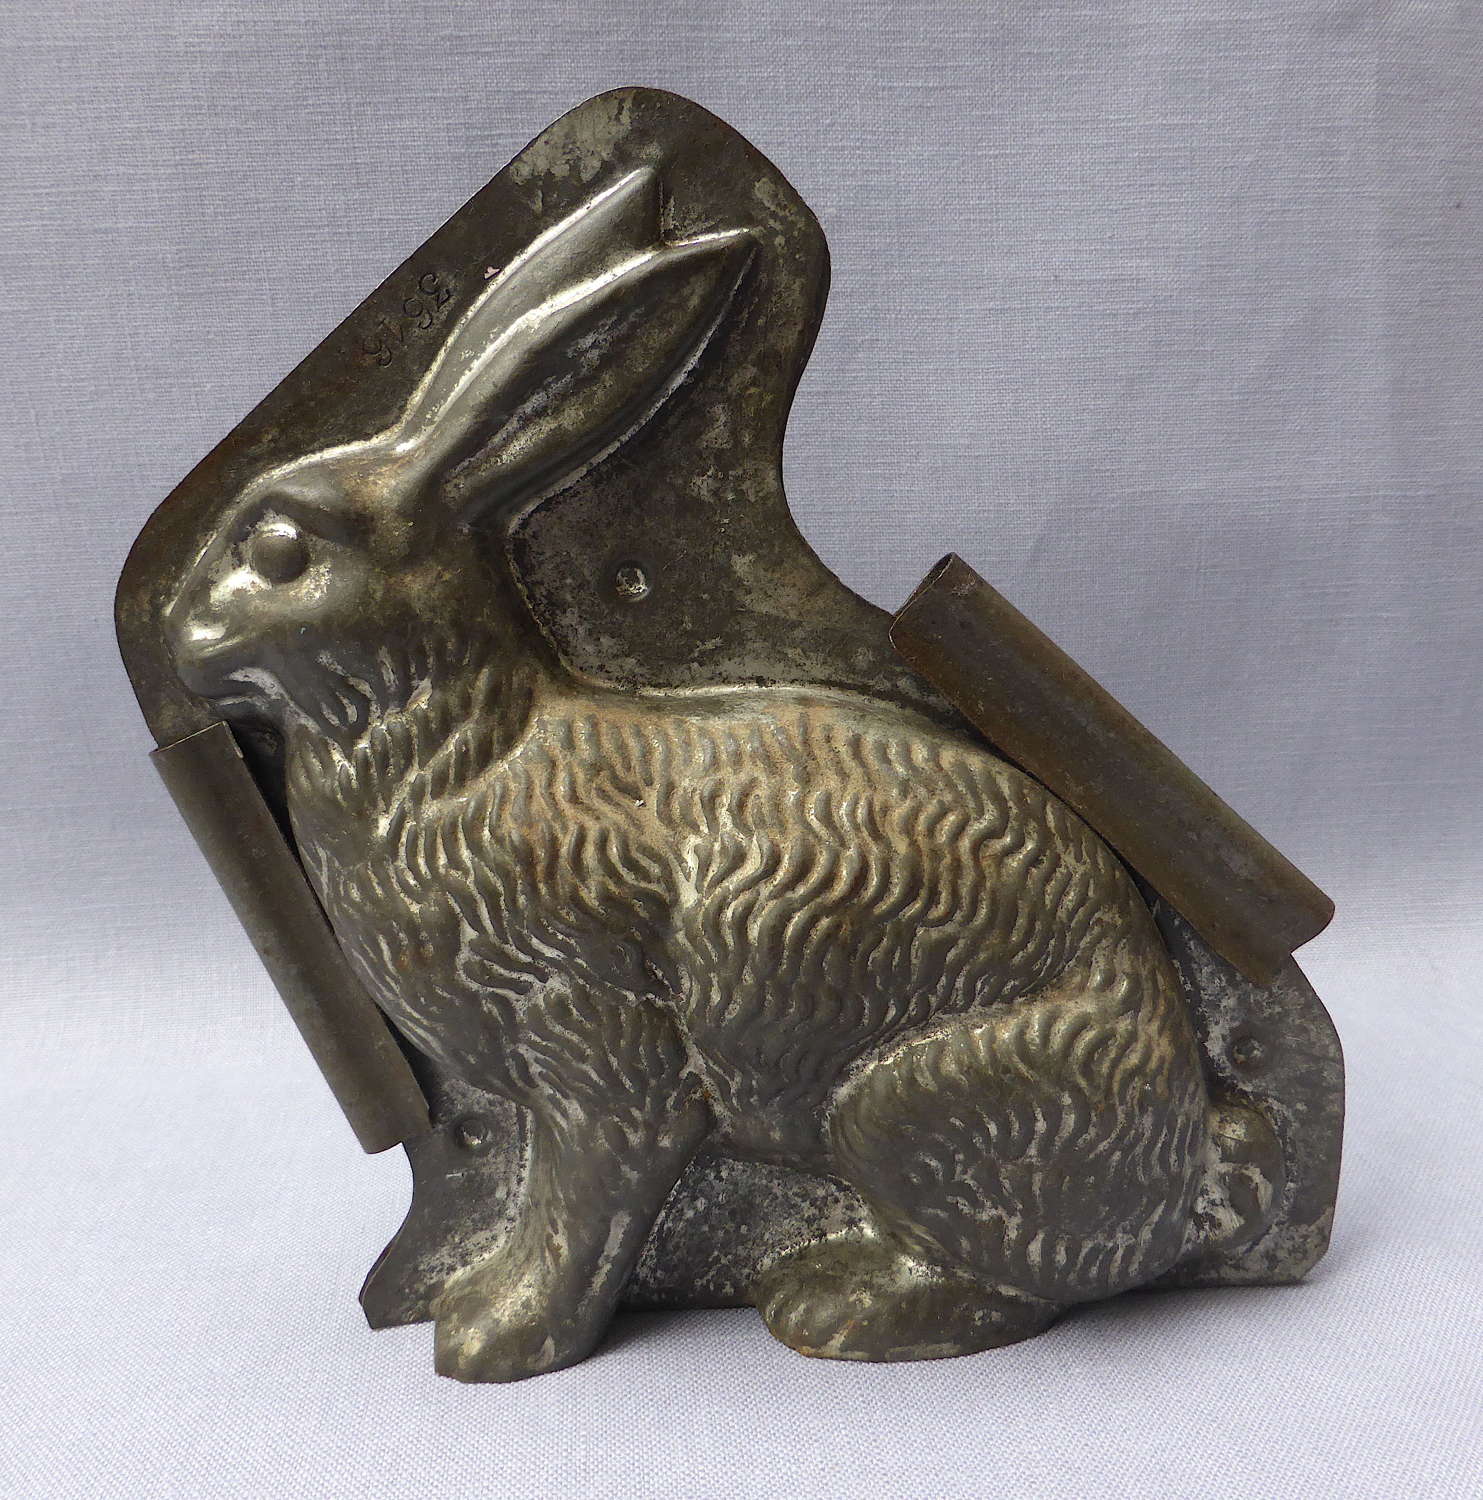 Antique Letang Fils Hare or Rabbit Chocolate Mould c1900